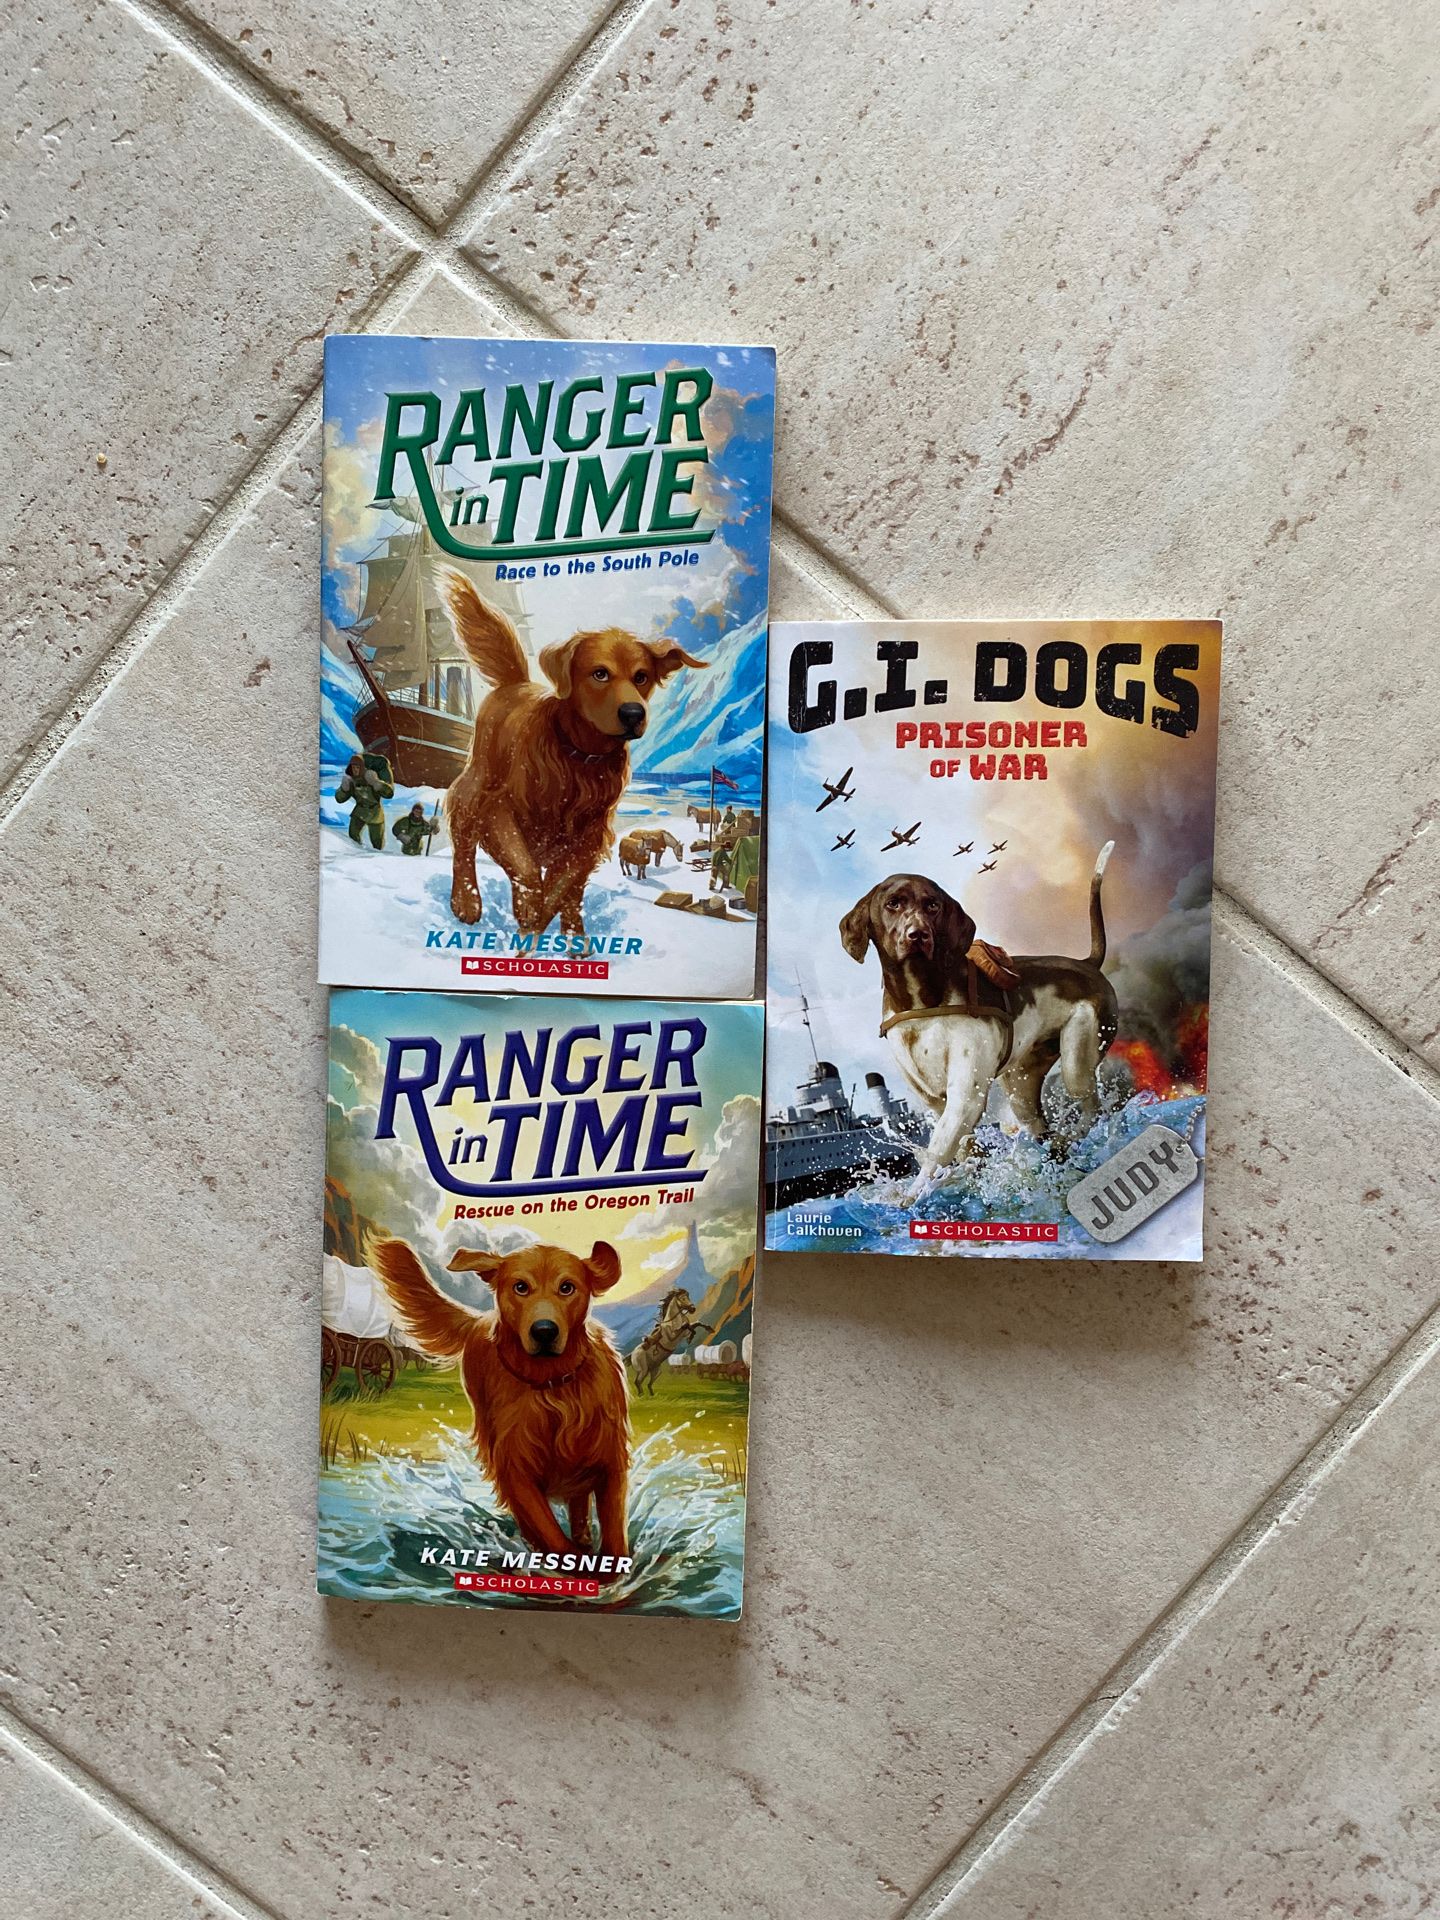 Ranger in Time books and G.I Dogs